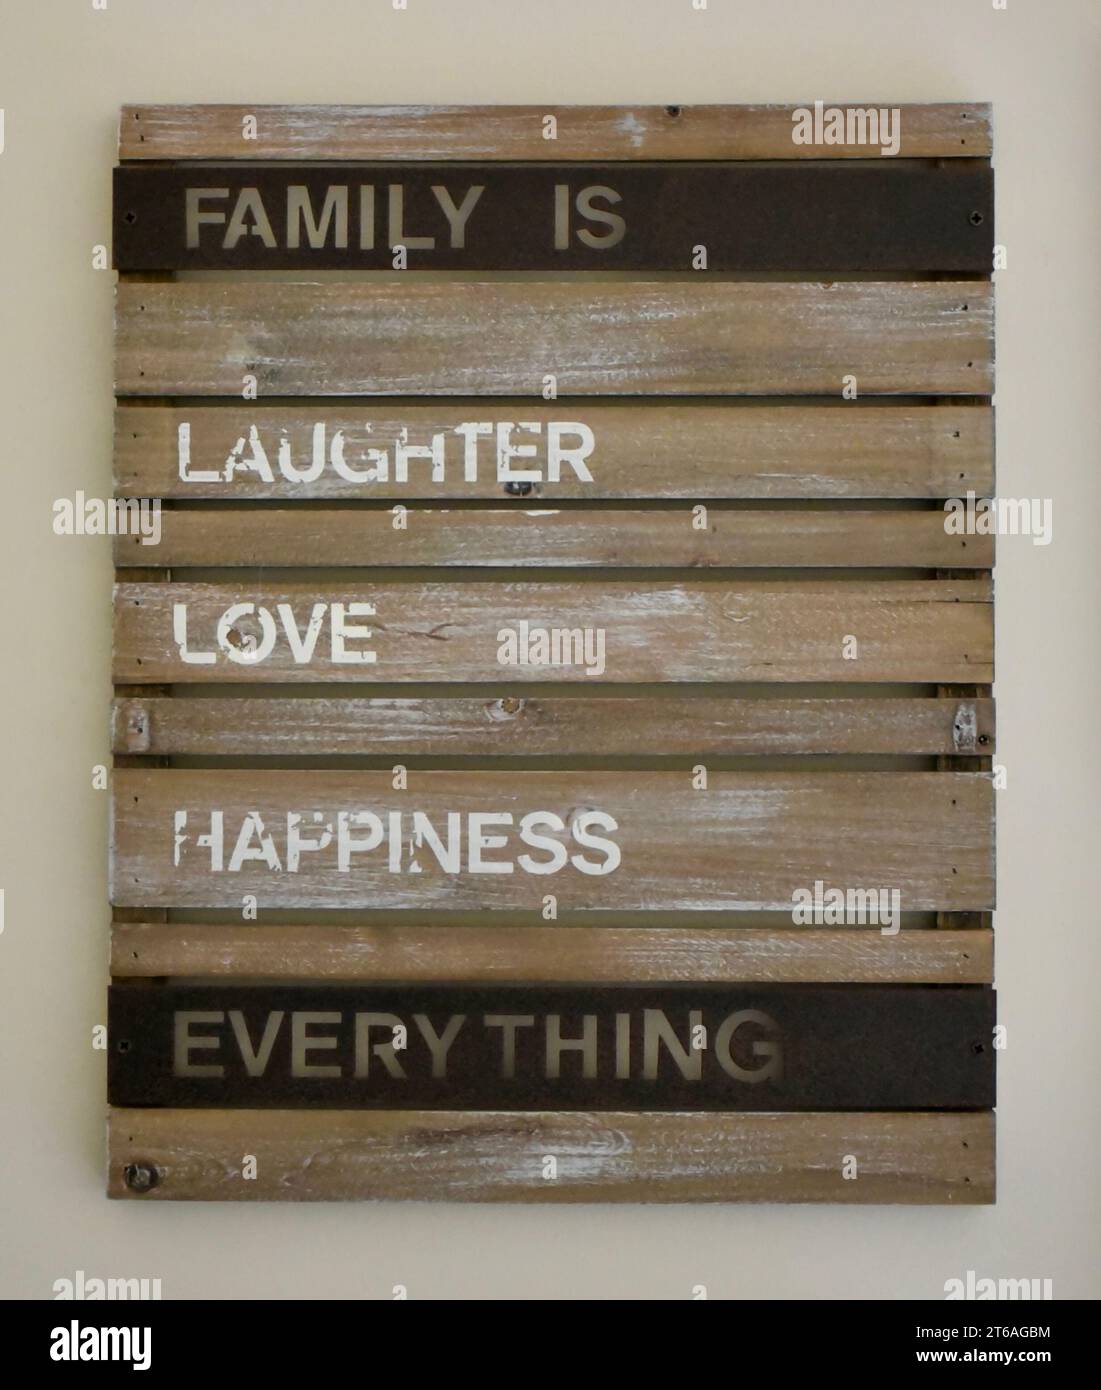 Family is Laughter Love Happiness Everything Stock Photo